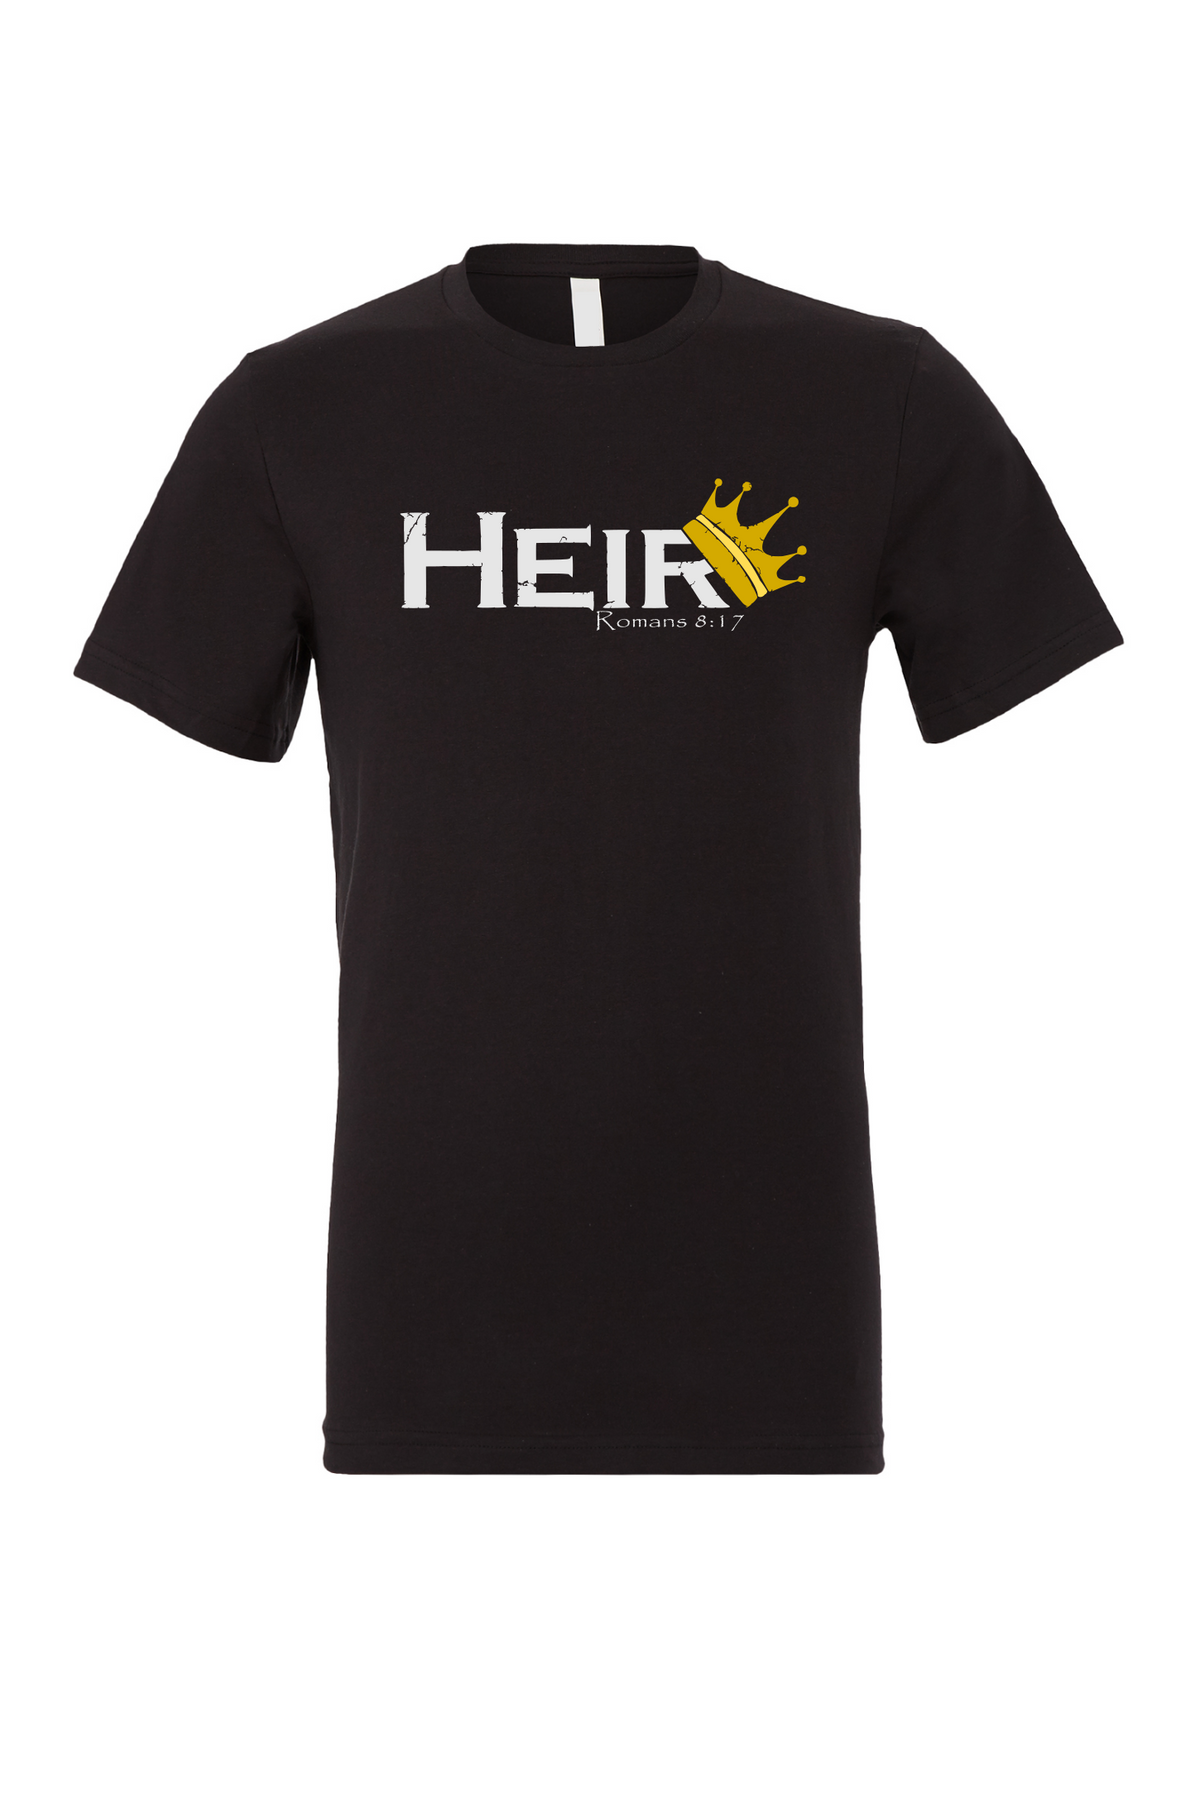 Heir of the King Childrens T-Shirt